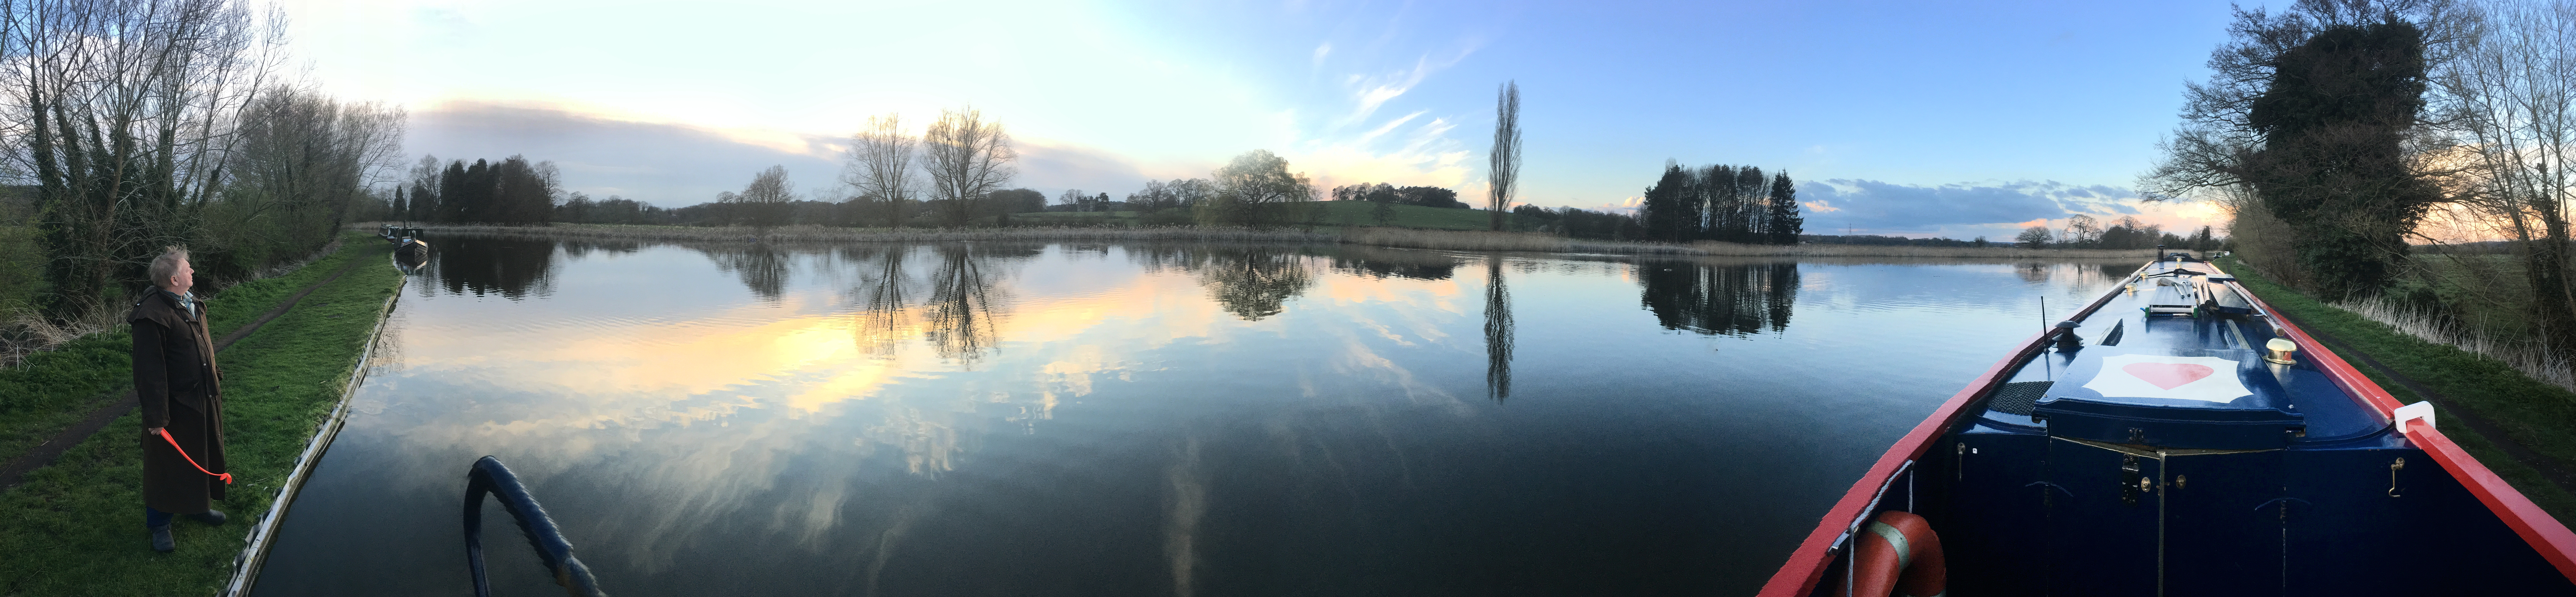 panoramic photograph showing the view from the towpath across a very wide section of canal, called tixall wide. A man stands on the towpath to the left of the image. The boat, Vulcan, is to the right.